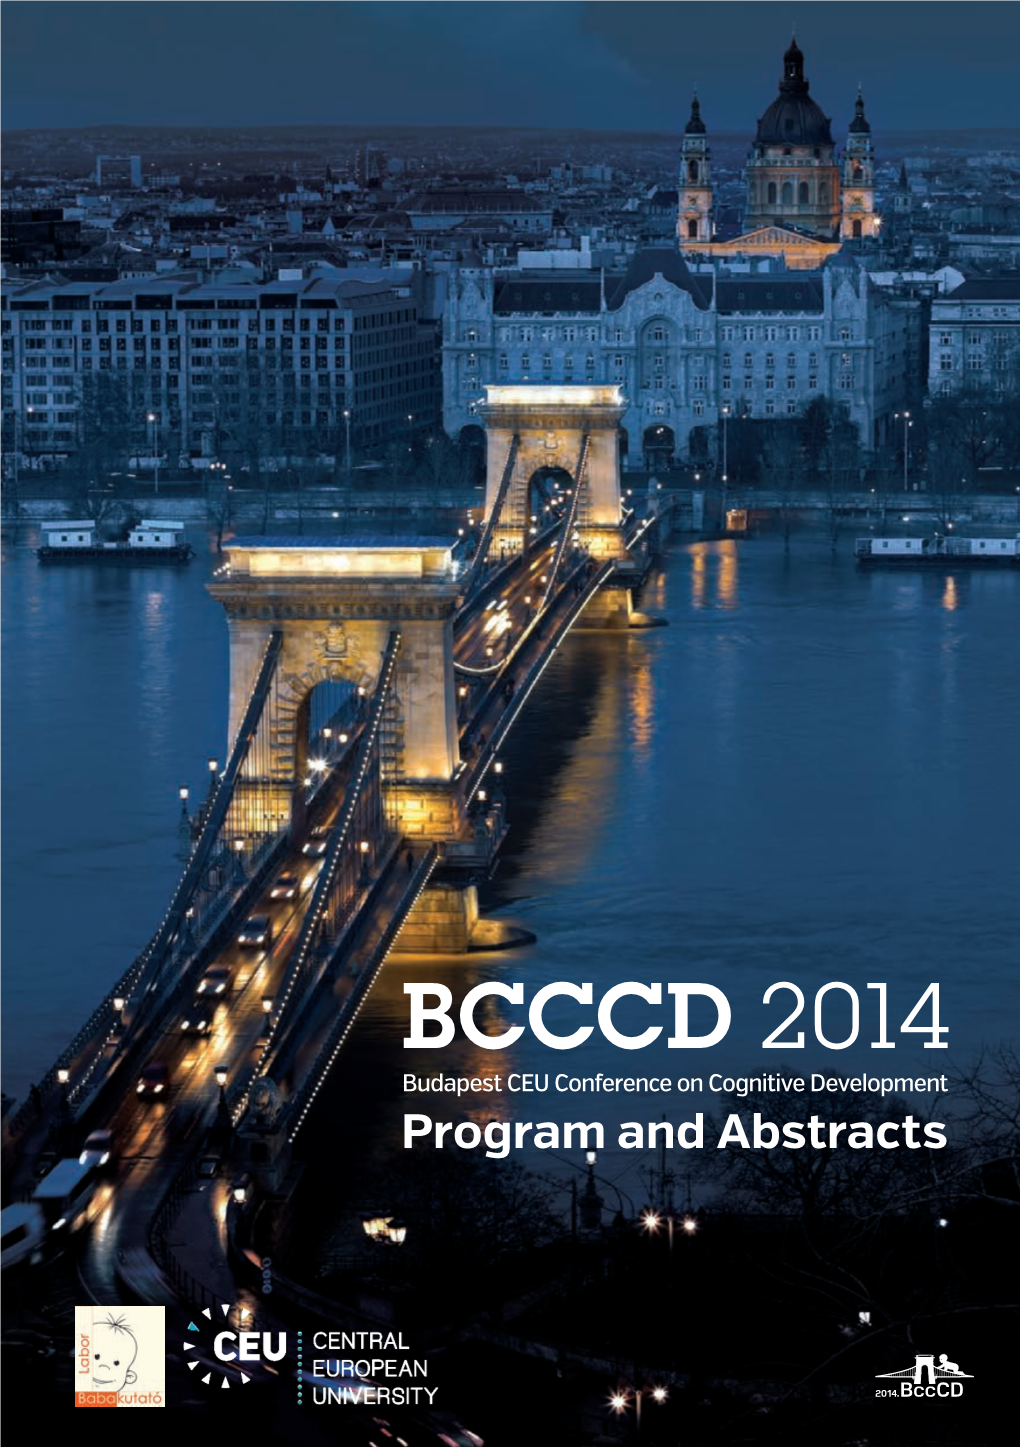 BCCCD 2014 Budapest CEU Conference on Cognitive Development Program and Abstracts